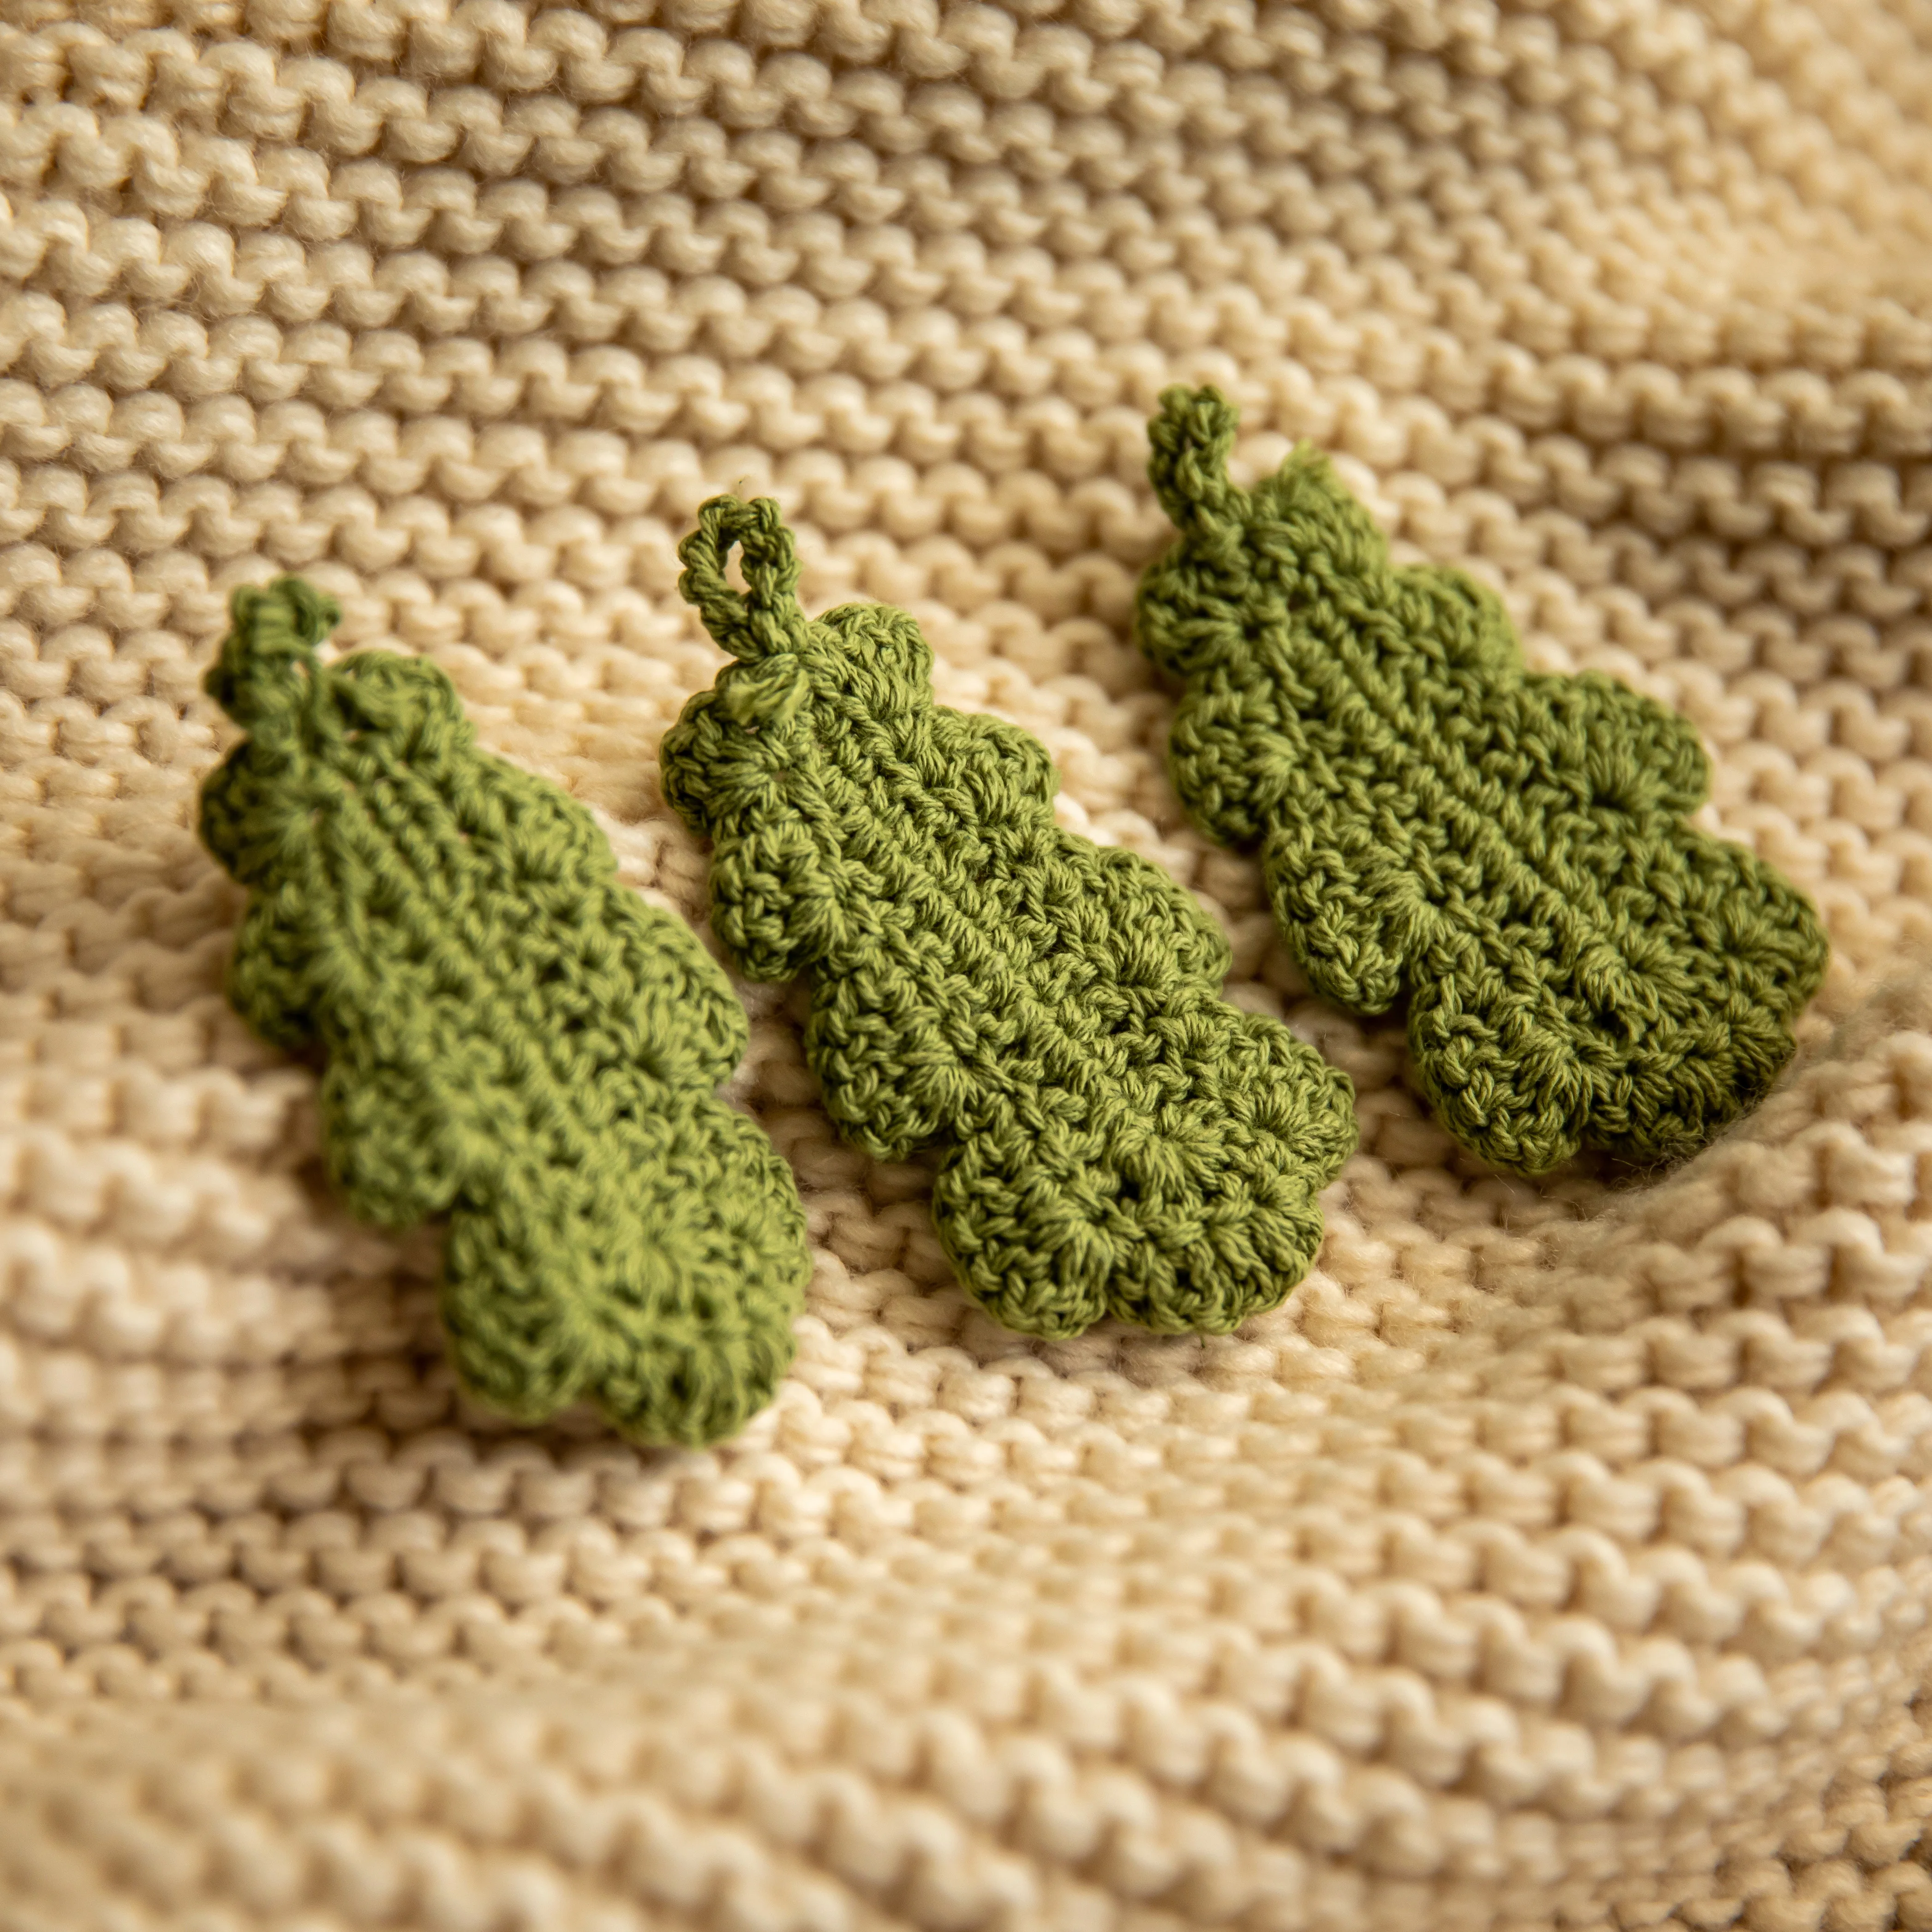 10 Pcs/lot Crochet Leaves Pine Nuts Leaves Teethers Beads DIY Pacifier Chain Teether Decor Baby Product Accessories Toy BPA Free